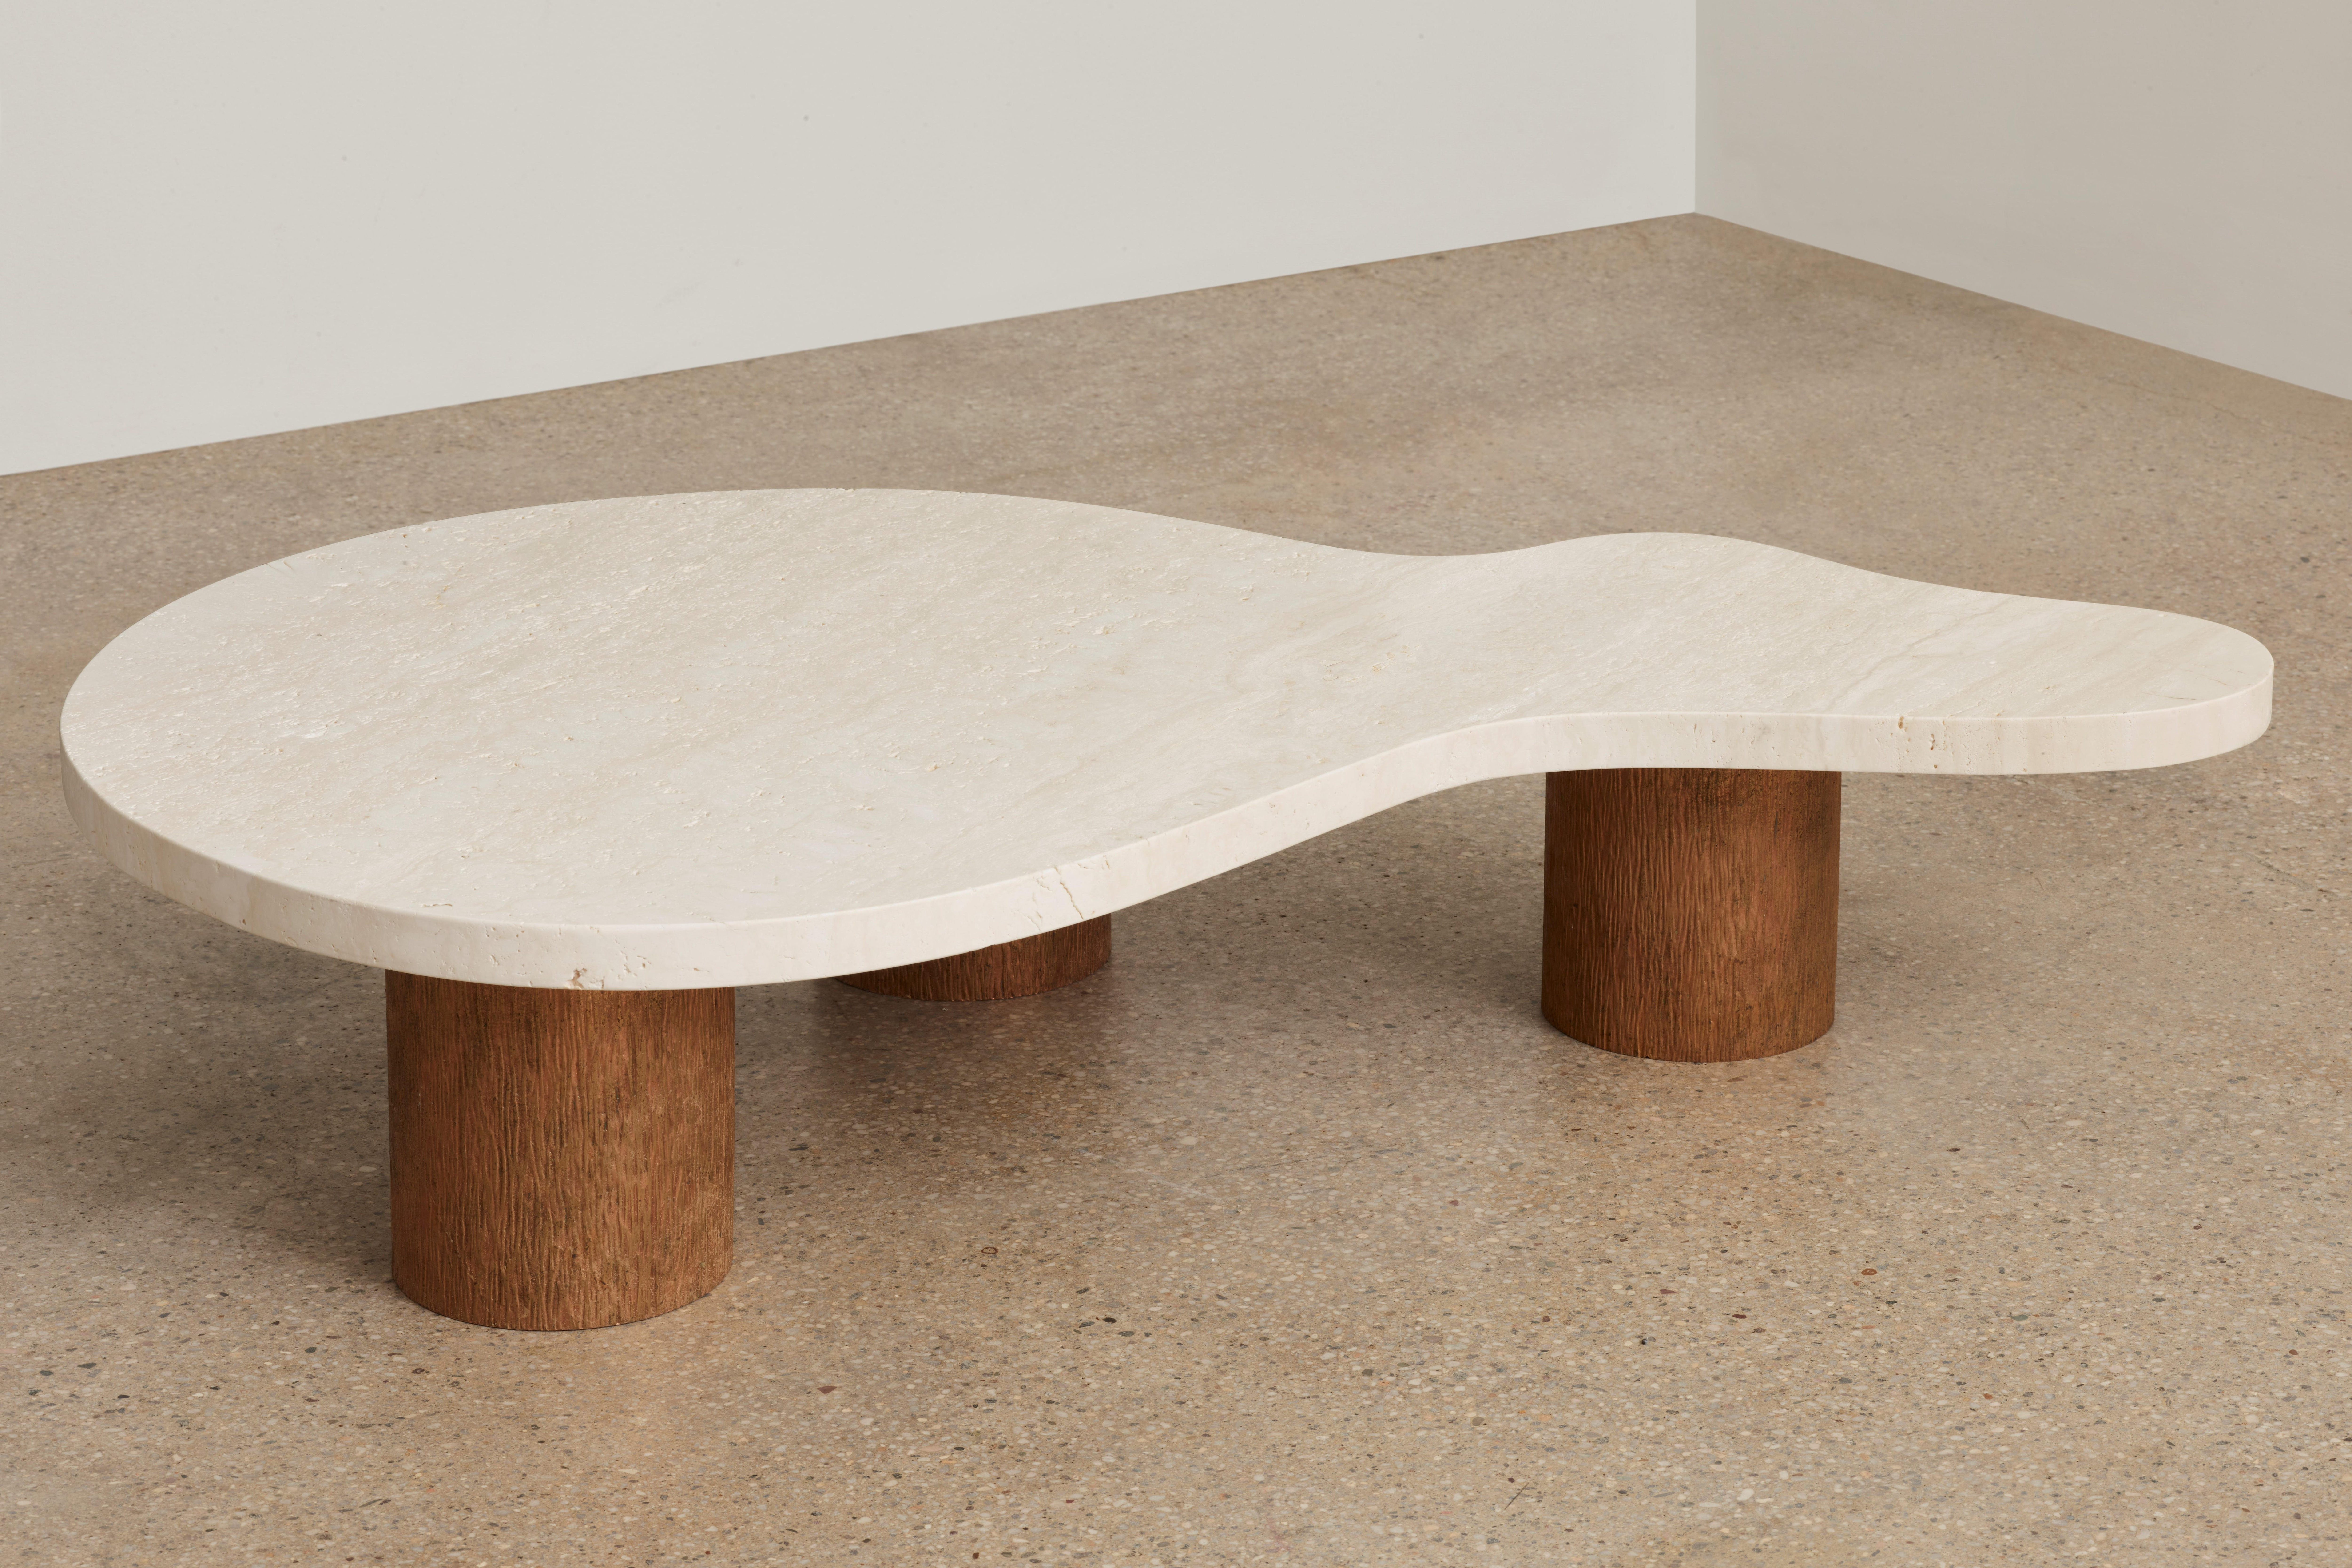 Luca coffee table large by Umberto Bellardi Ricci
Dimensions: D 55” x W 34” x H 13.5 in
Materials: Travertine, Bronze legs.

Umberto Bellardi Ricci is an Italian sculptor and architect based in New York City, practicing across London, Mexico,